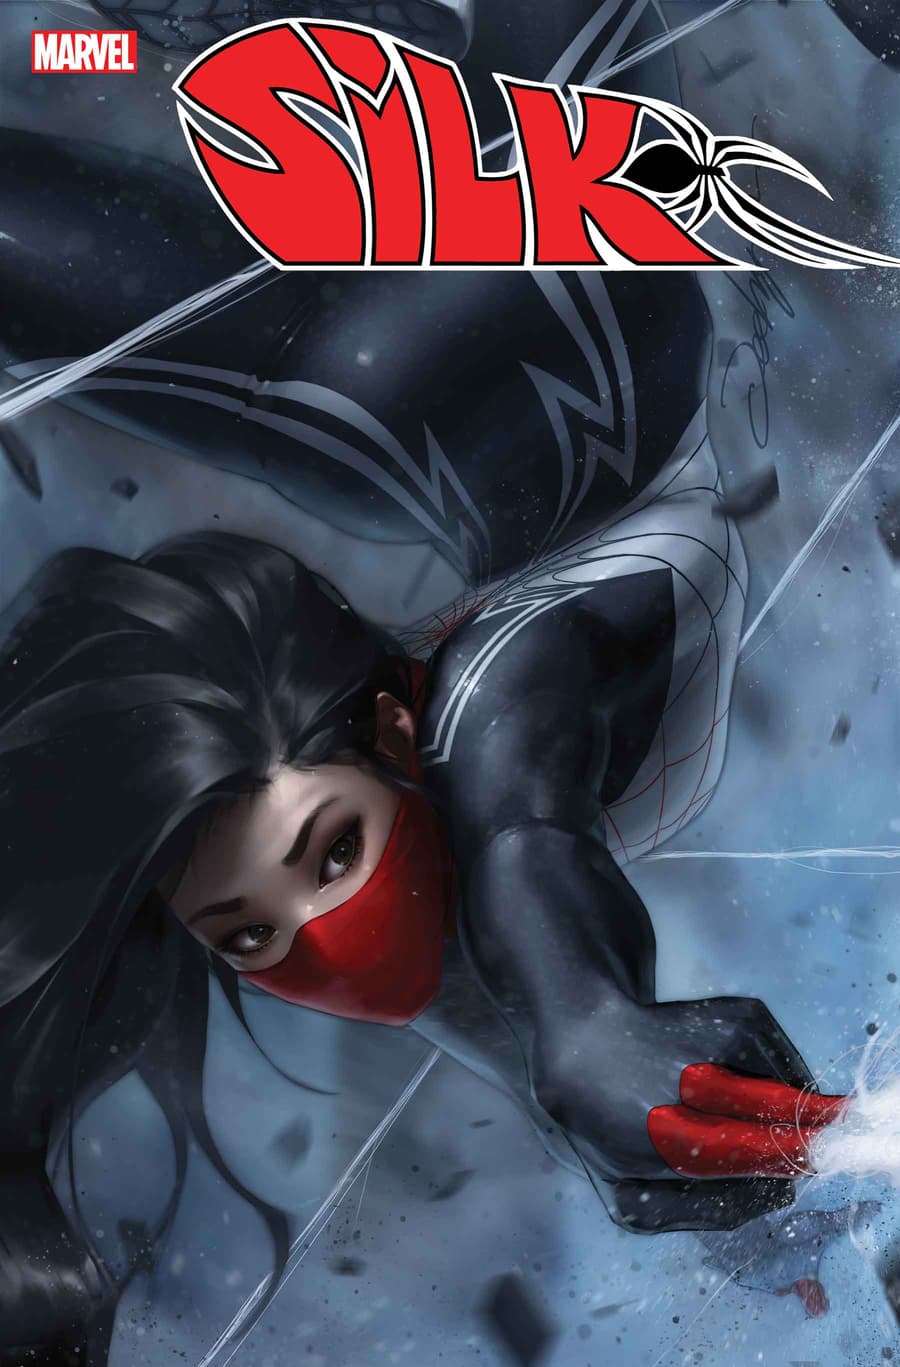 Silk #1 variant cover